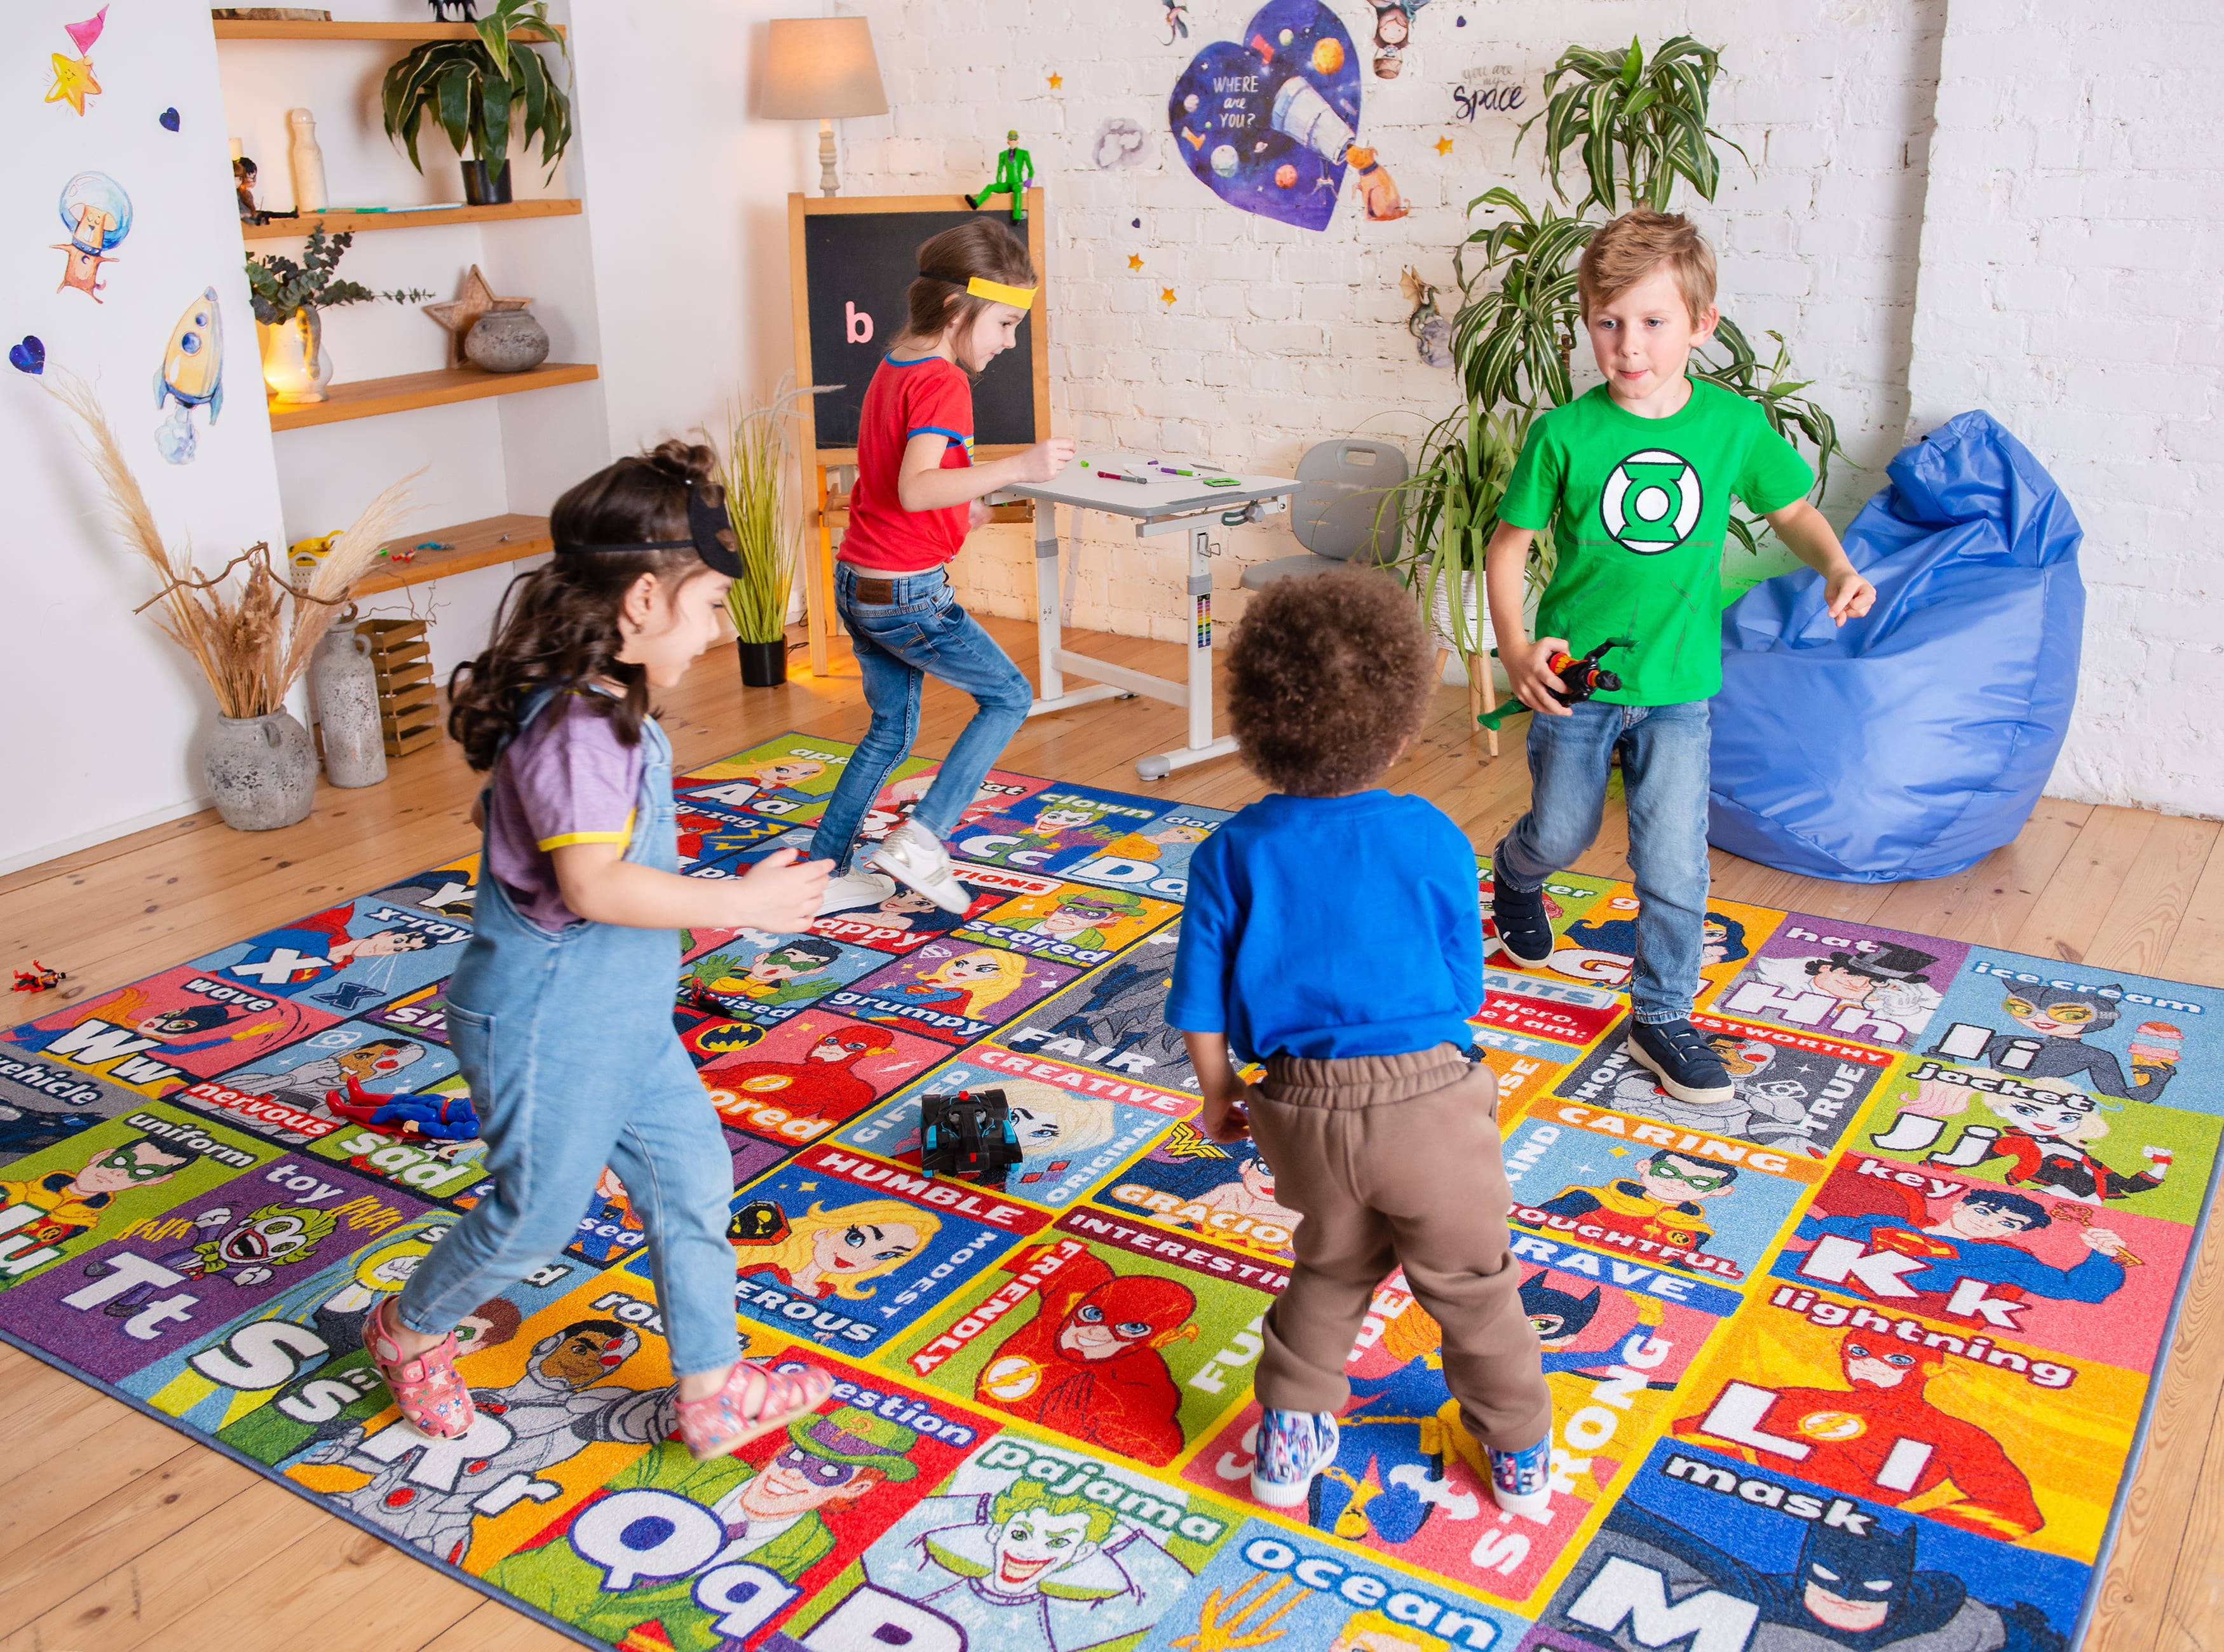 Champion Rugs Kids/Baby Room/Classroom Area Rug ABC Puzzle 5 Feet X 7 Feet A-Z and 1-9 - Play Safely Learn Educational & Have Fun -Ideal Gift for Children Baby Bedroom Play Room Game Mat 